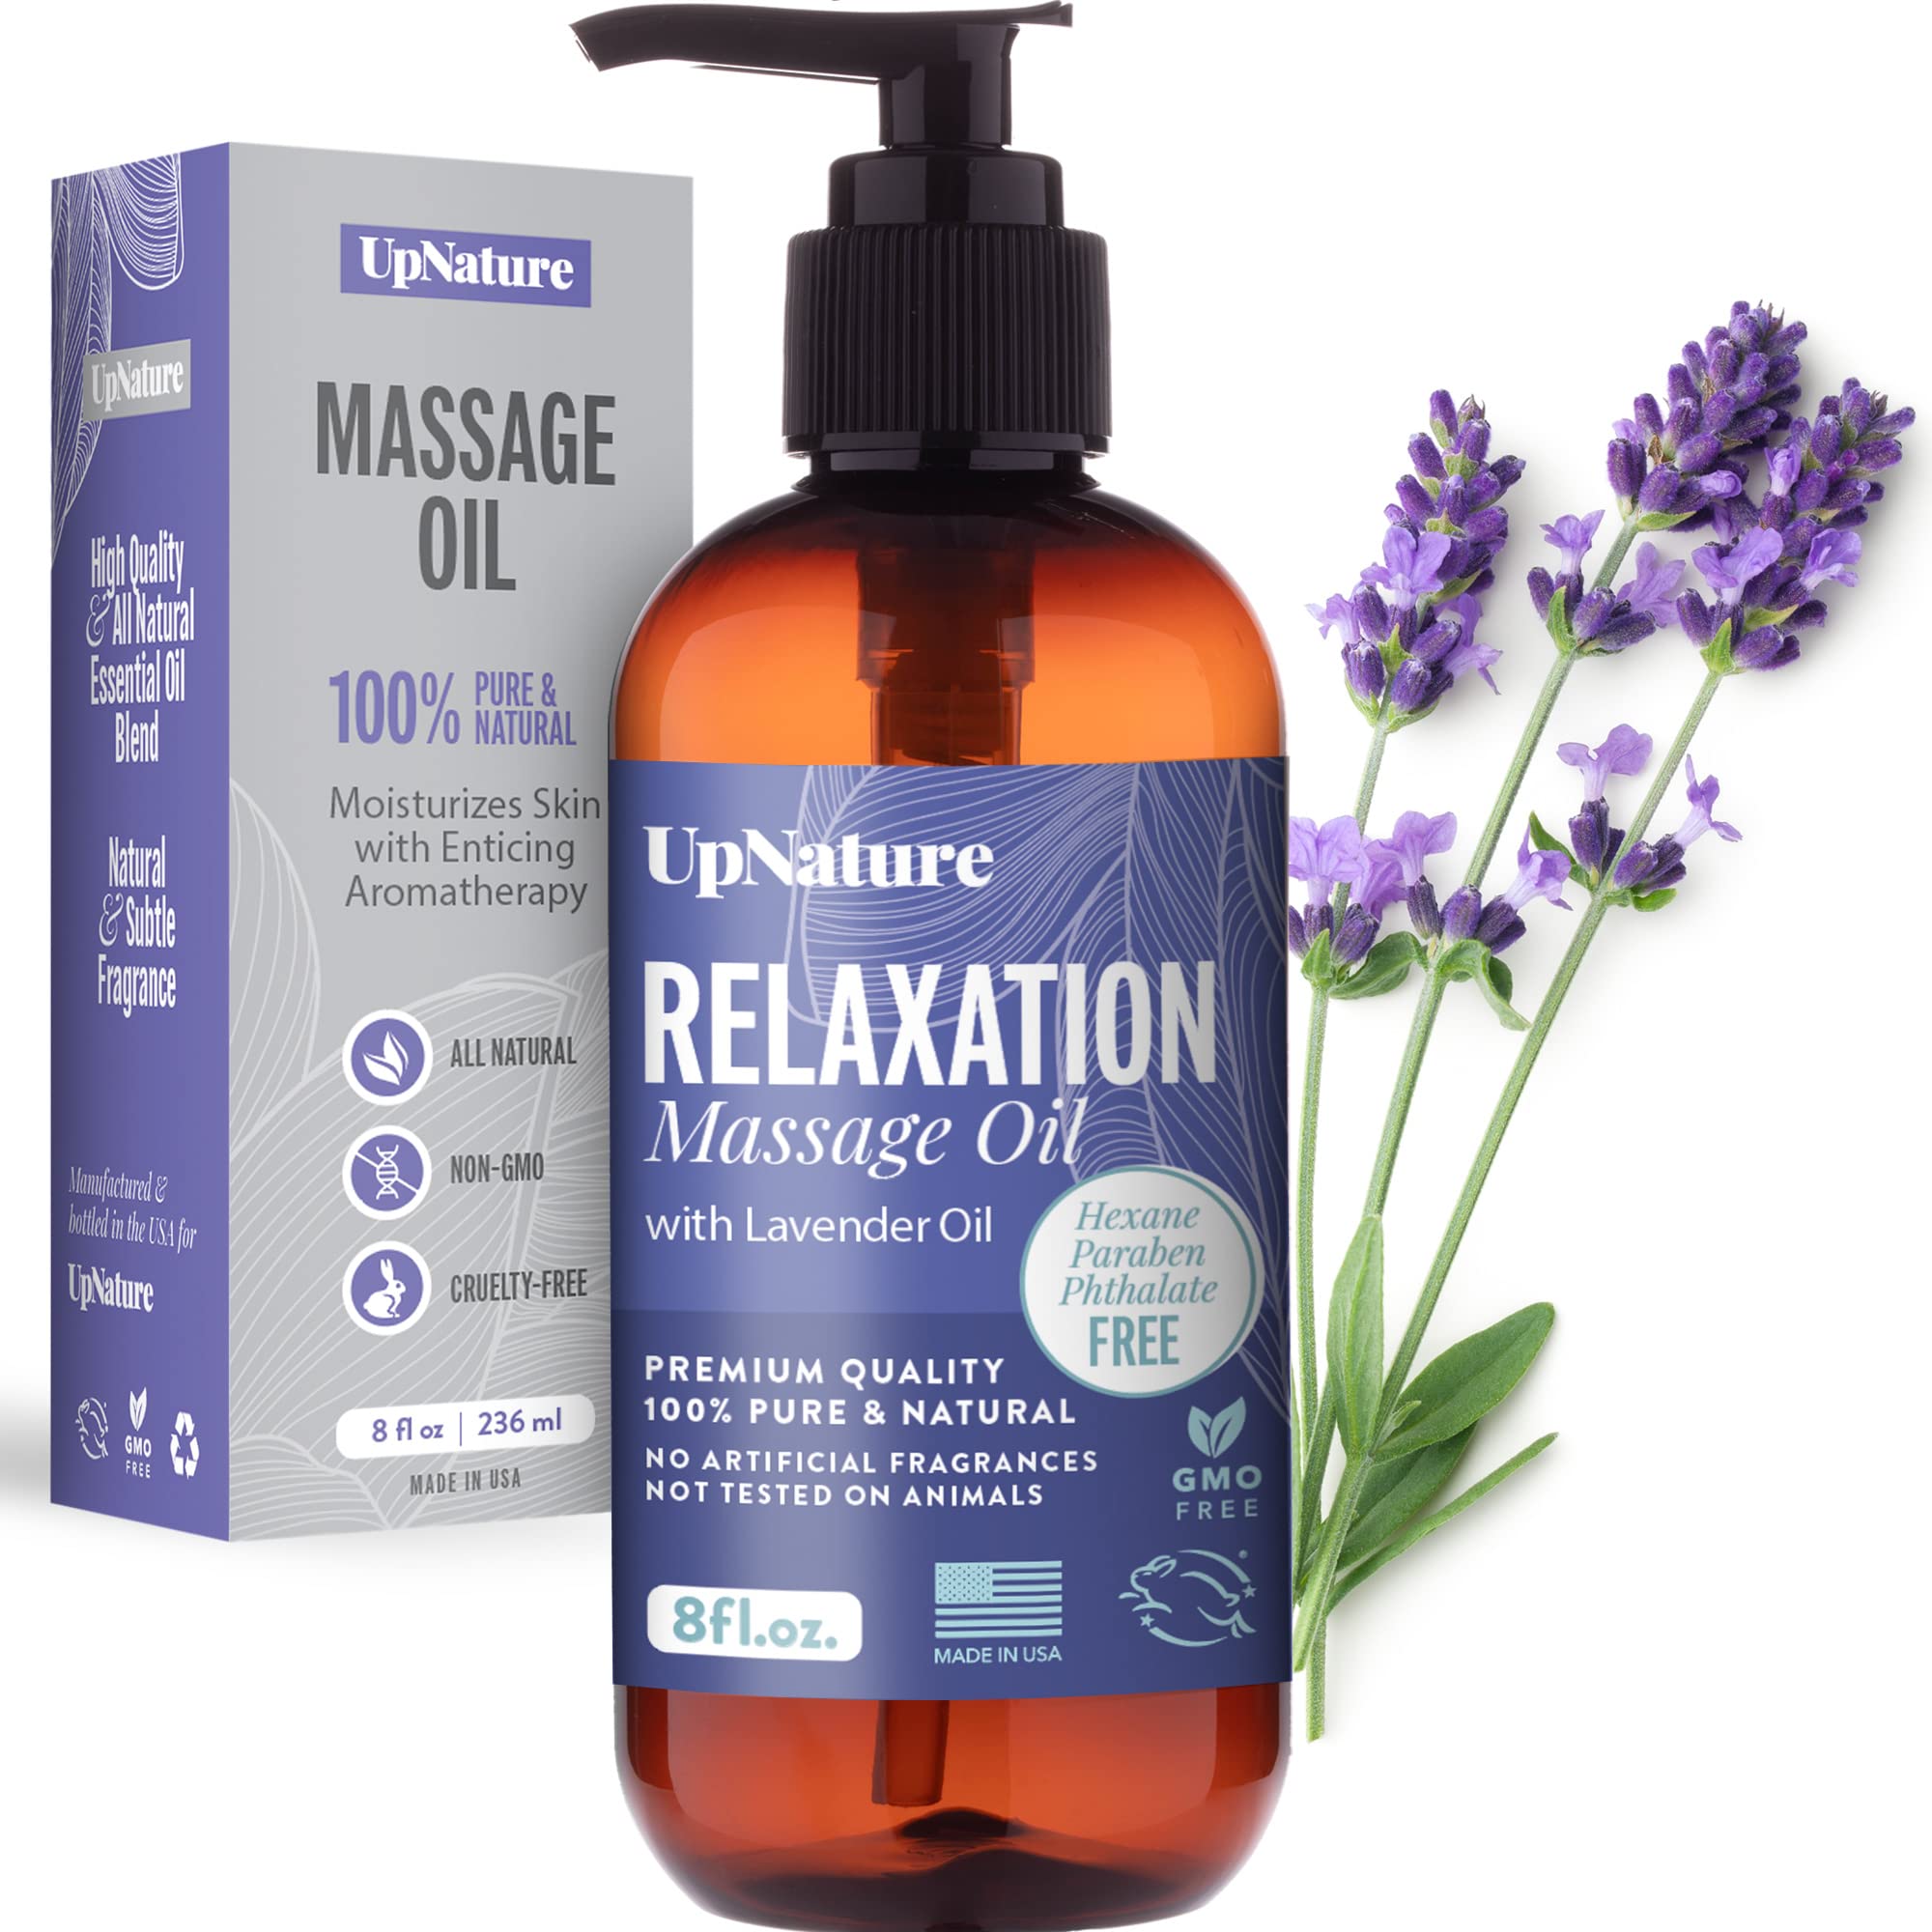 Relaxation Lavender Massage Oil for Couples, 8oz- Lavender Massage Oil for Massage Therapy, Romantic, Calming, Stress Relief, Aromatic Moment- Relaxing Gifts for Women & Men